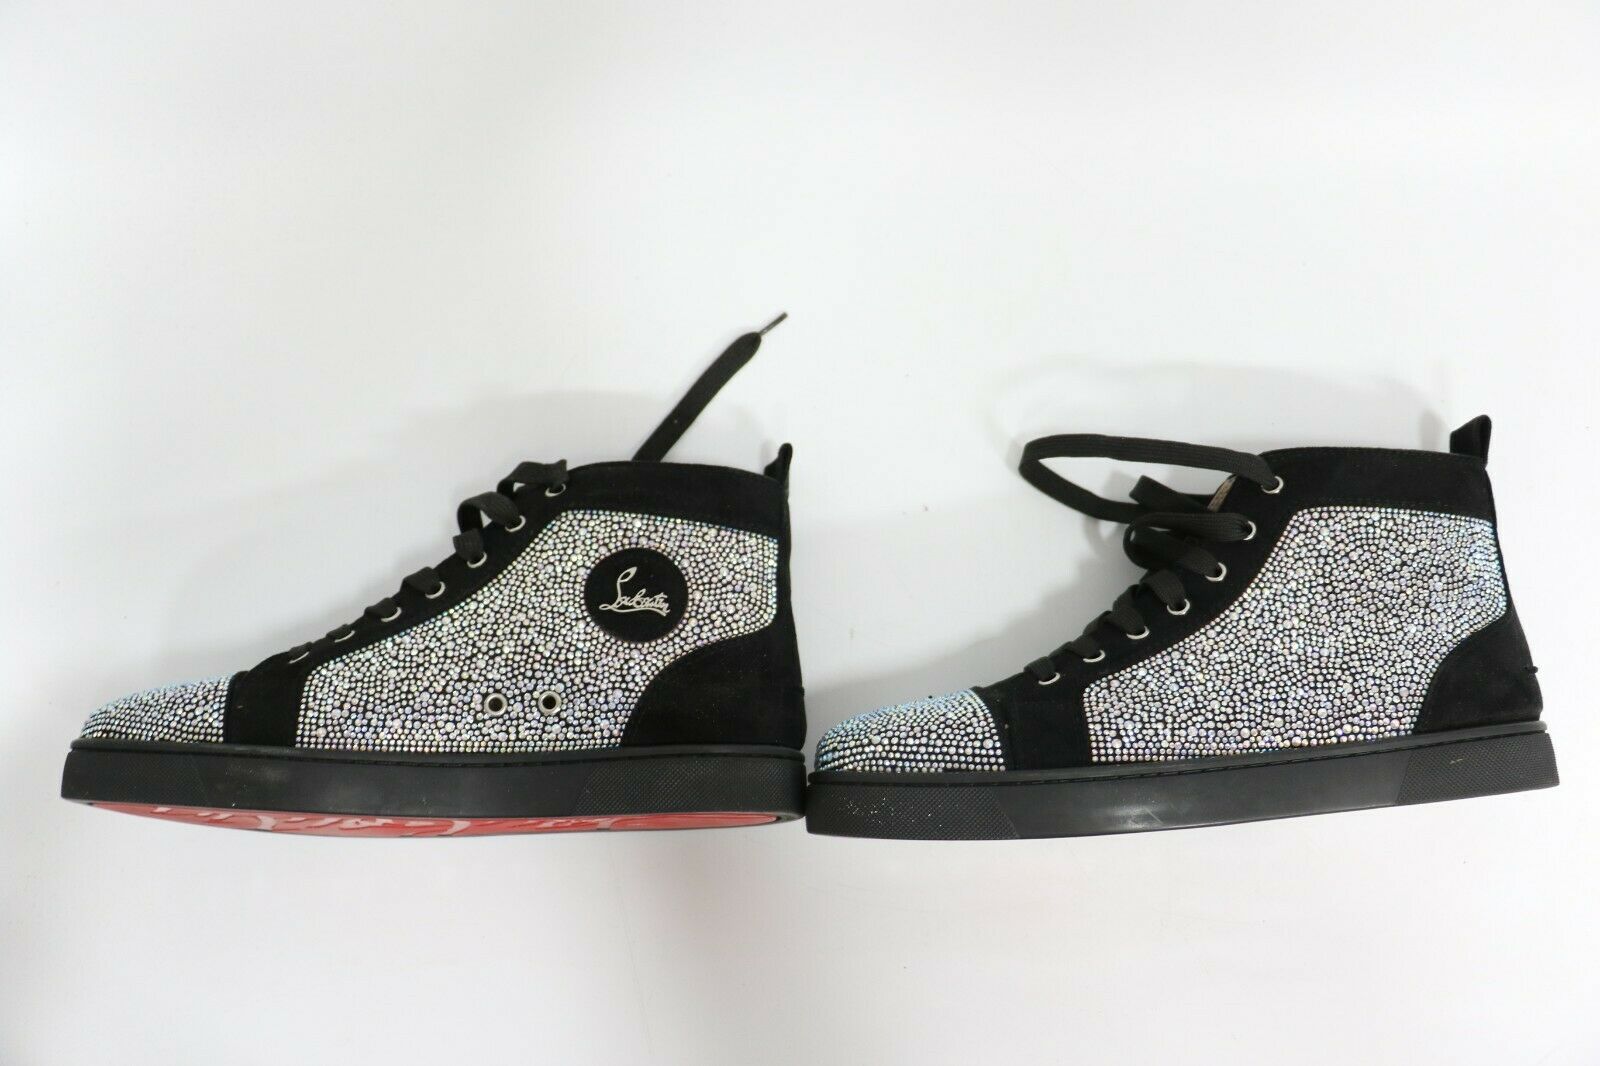 Christian Louboutin: Mens Strass Shoes Swarovski | Red Sole | Size US ...